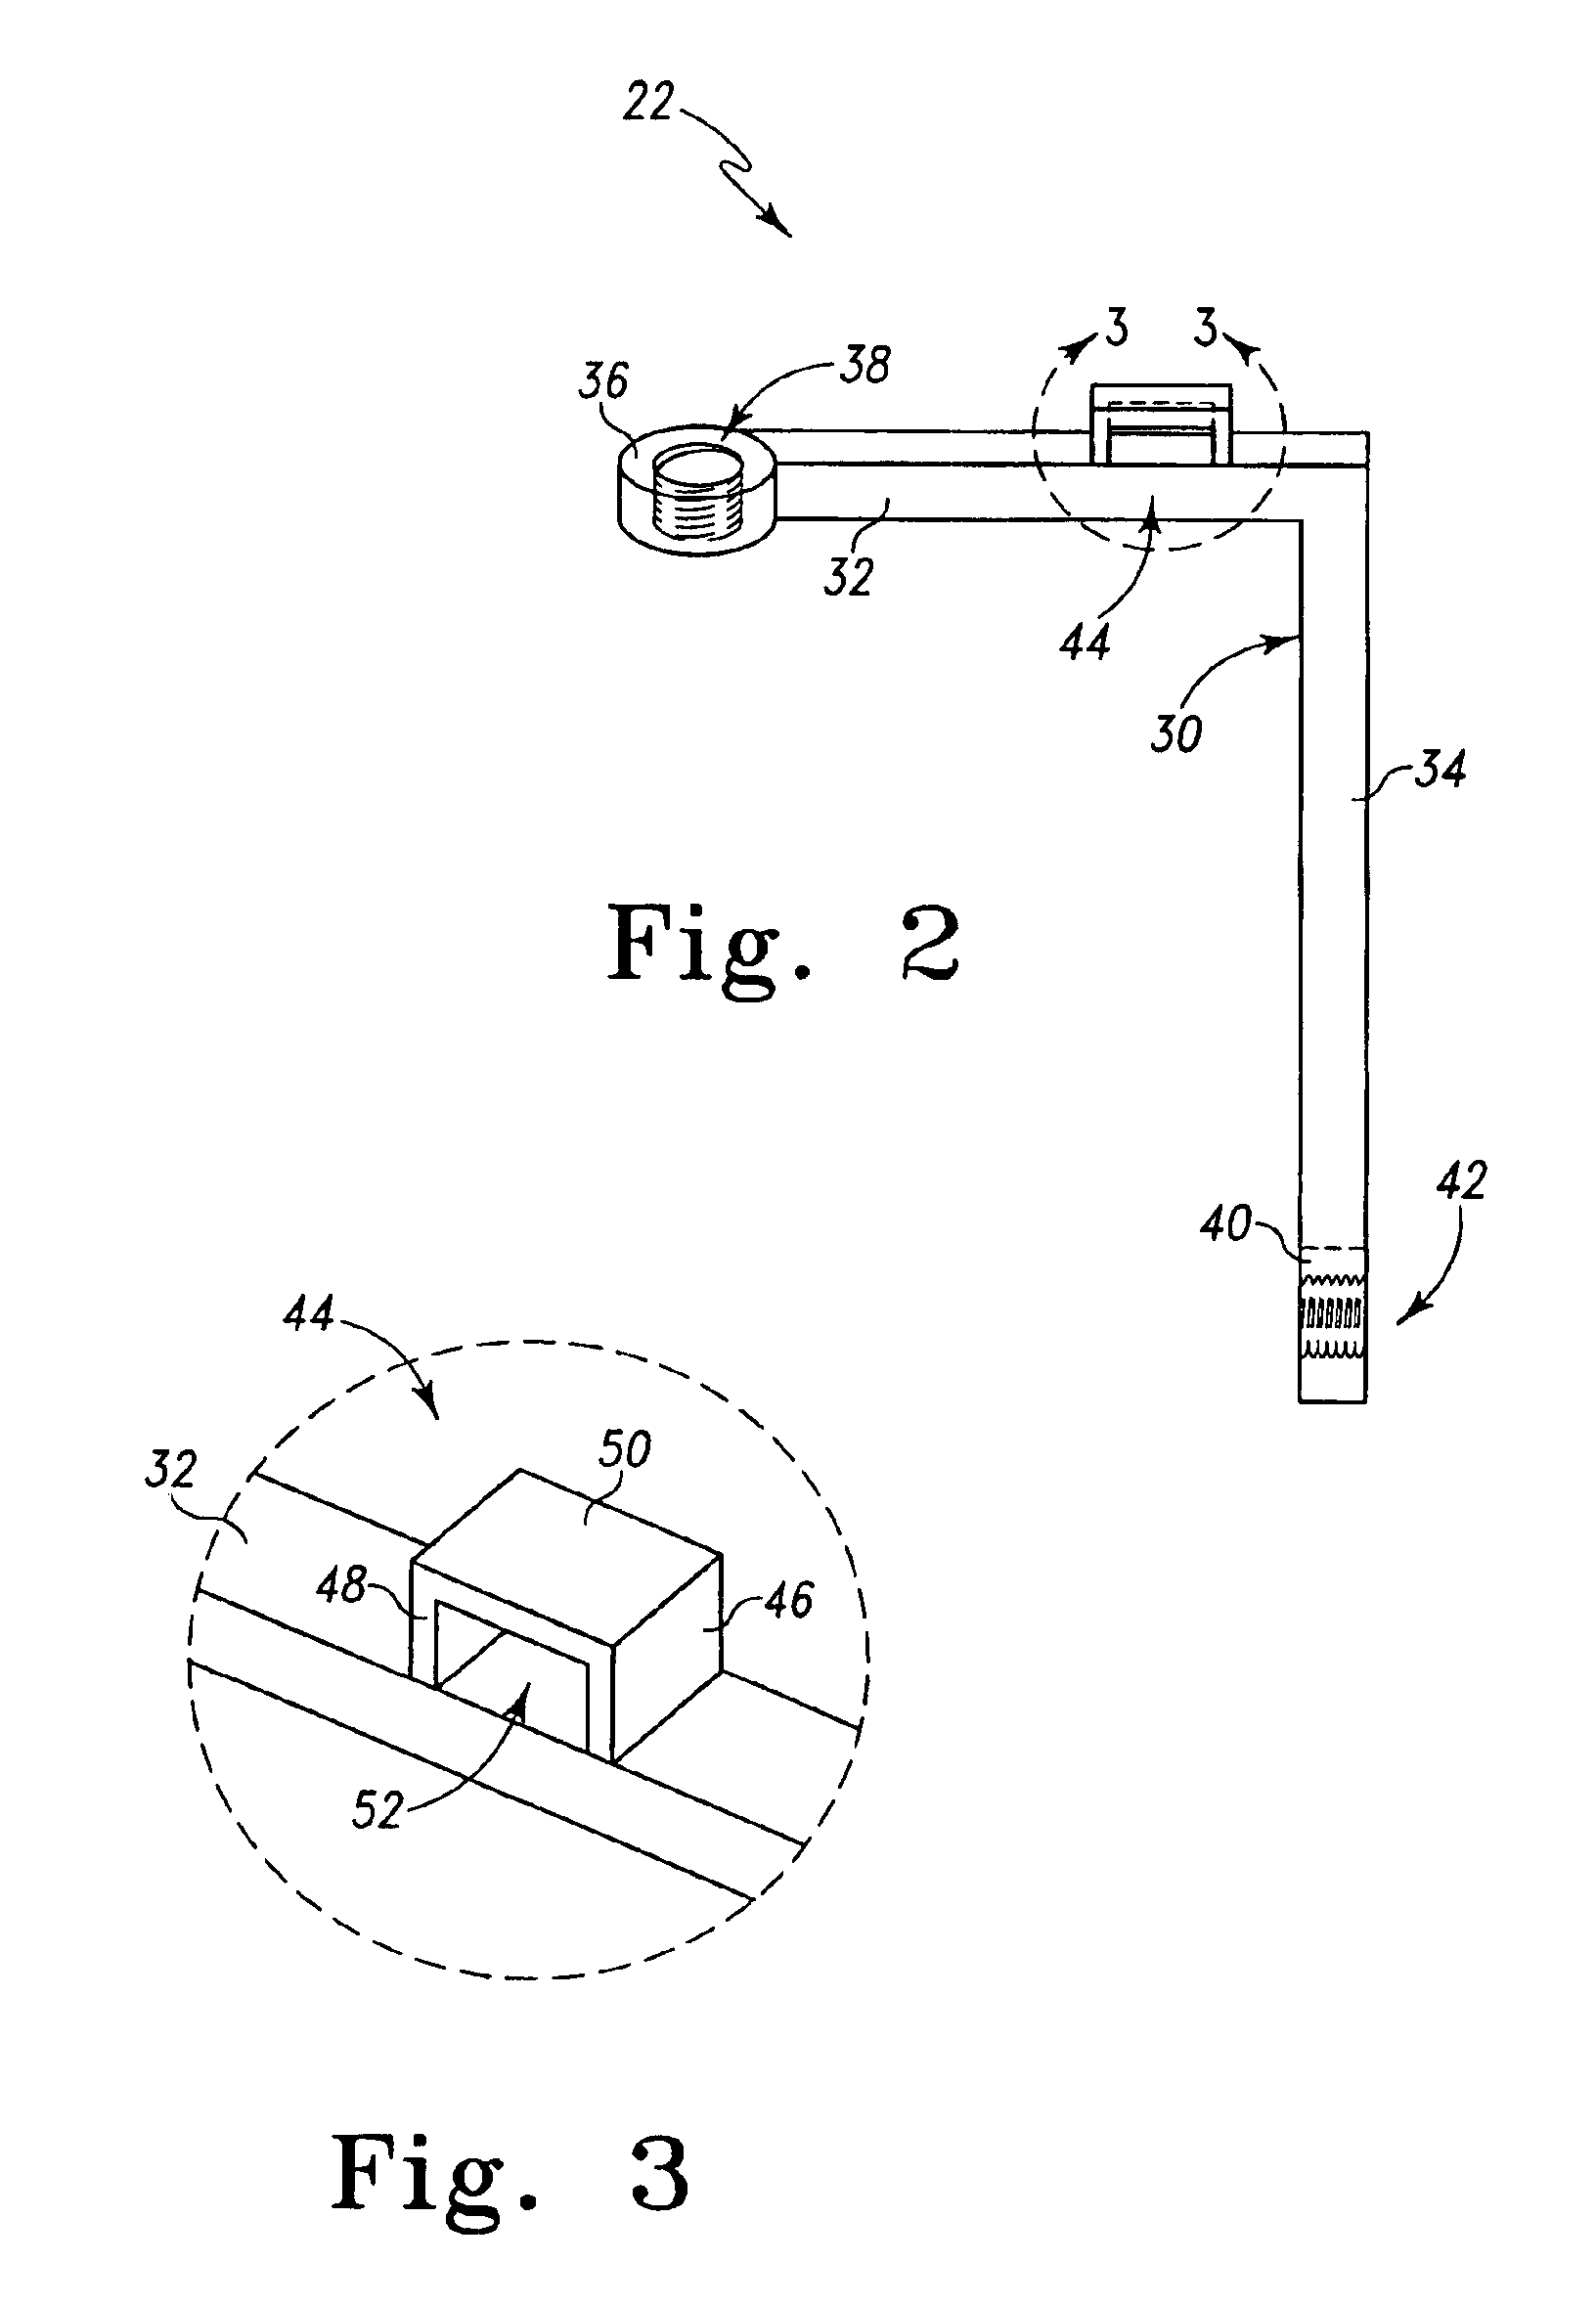 Method and apparatus for resecting bone from an ulna in preparation for prosthetic implantation